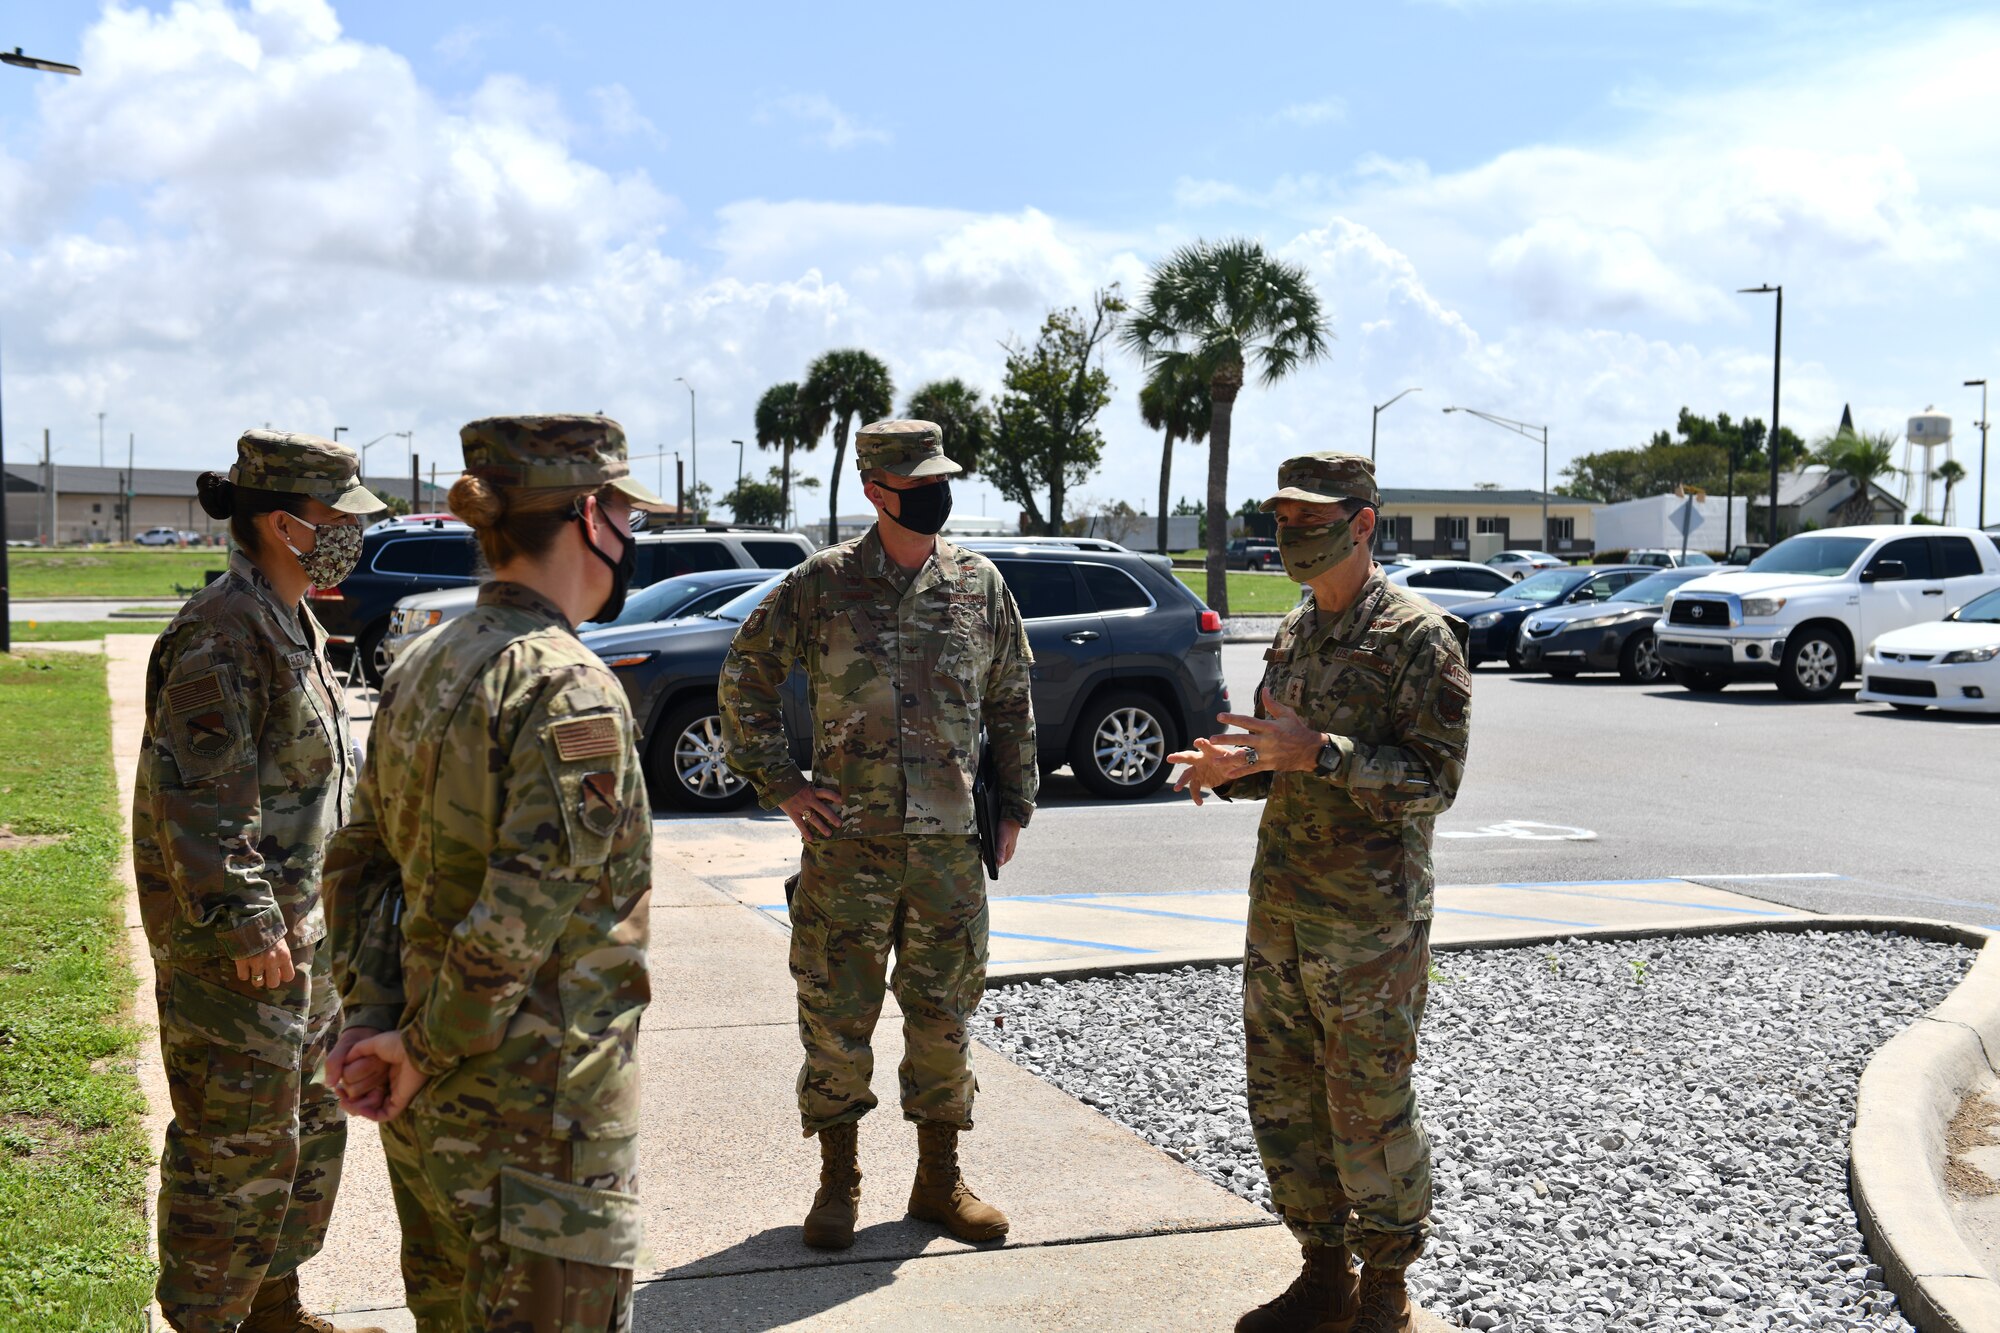 U.S. Air Force Maj. Gen. Sean L. Murphy (right), Air Force Deputy Surgeon General, greets 325th and 96th Medical Group leadership at Tyndall Air Force Base, Florida, Aug. 31, 2020. Murphy accompanied leaders from the Defense Health Agency on a tour of Tyndall to discuss the future of the base and DHA. (U.S. Air Force photo by Senior Airman Stefan Alvarez)